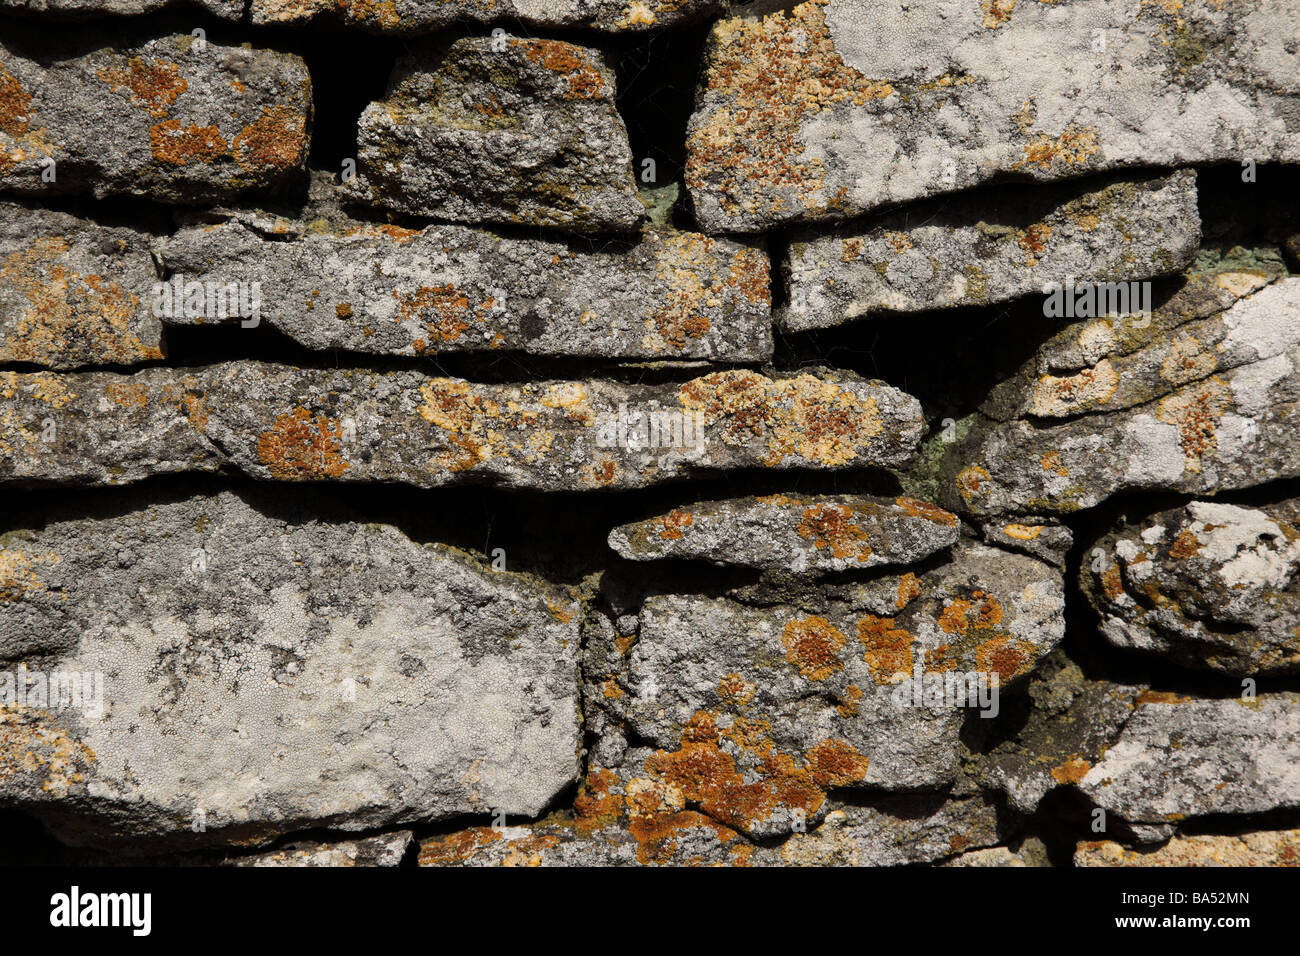 Close up of a dry stone wall, Bibury, The Cotswolds, England Stock Photo